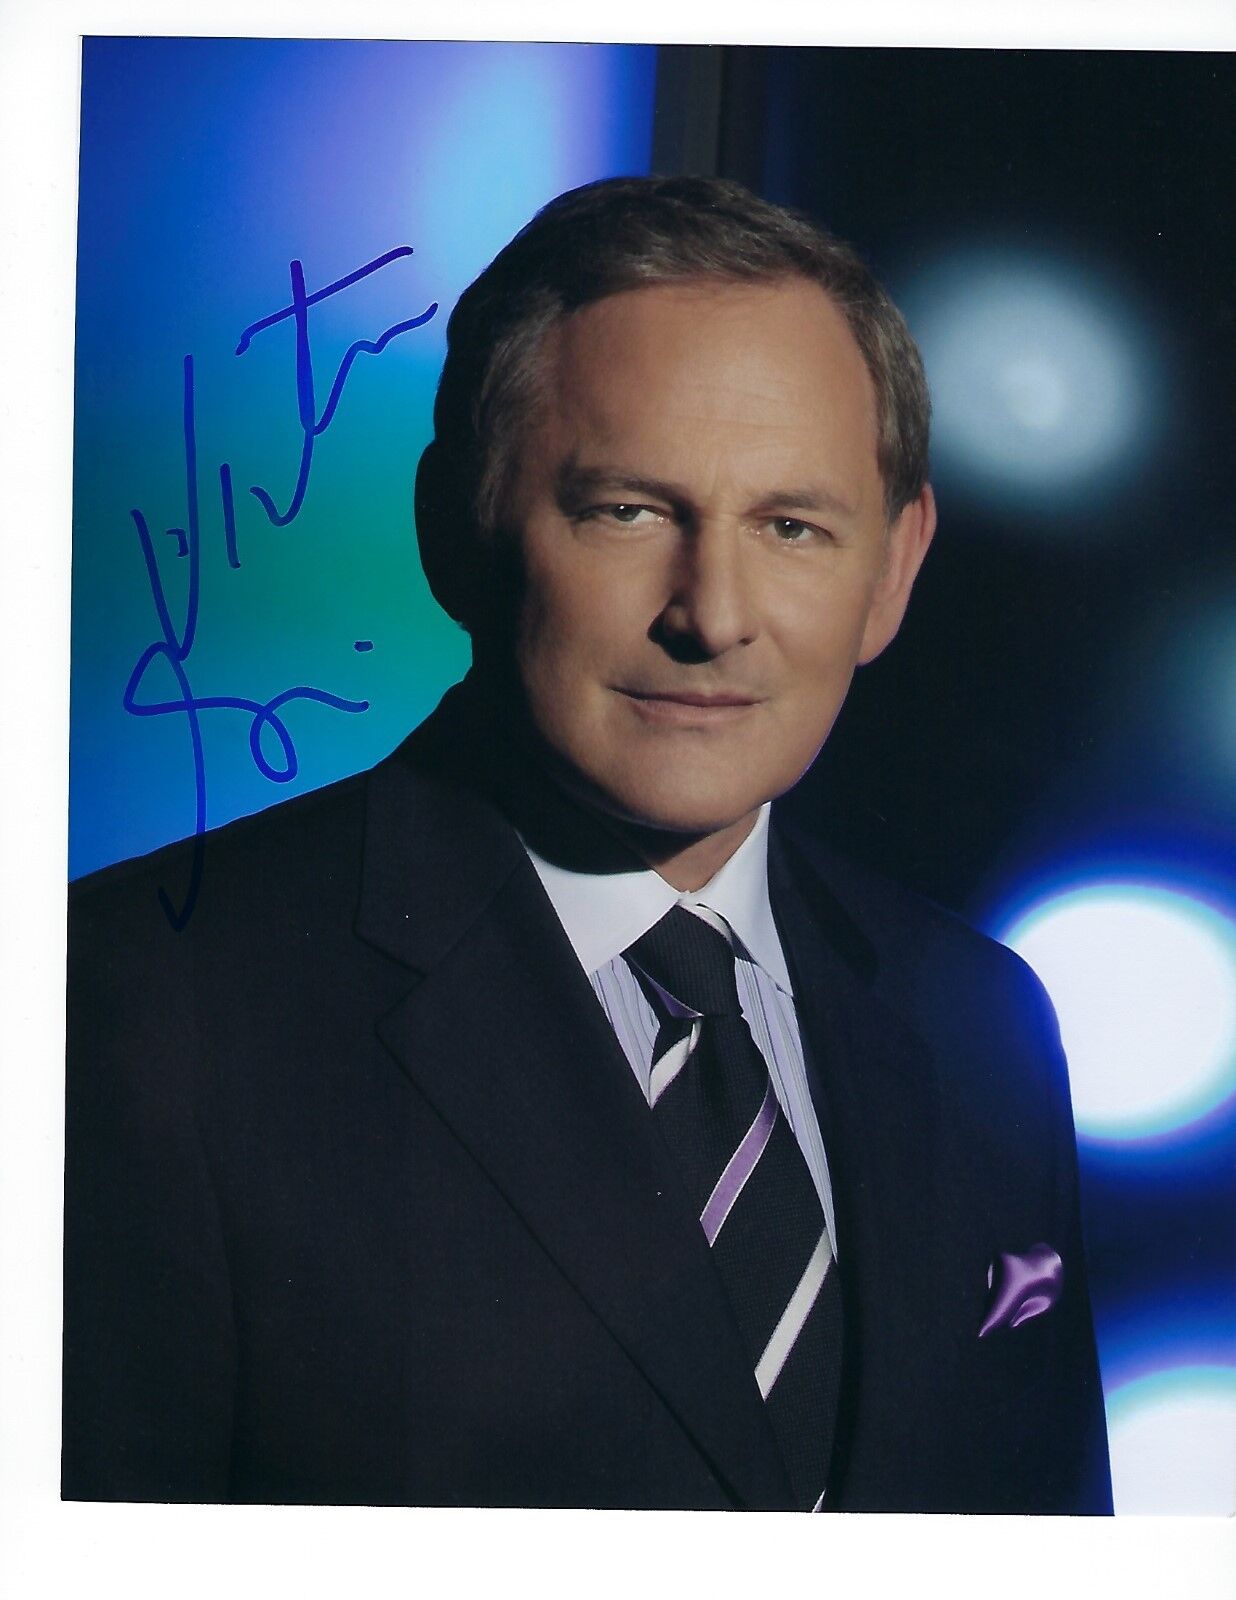 Victor Garber - Alias signed Photo Poster painting